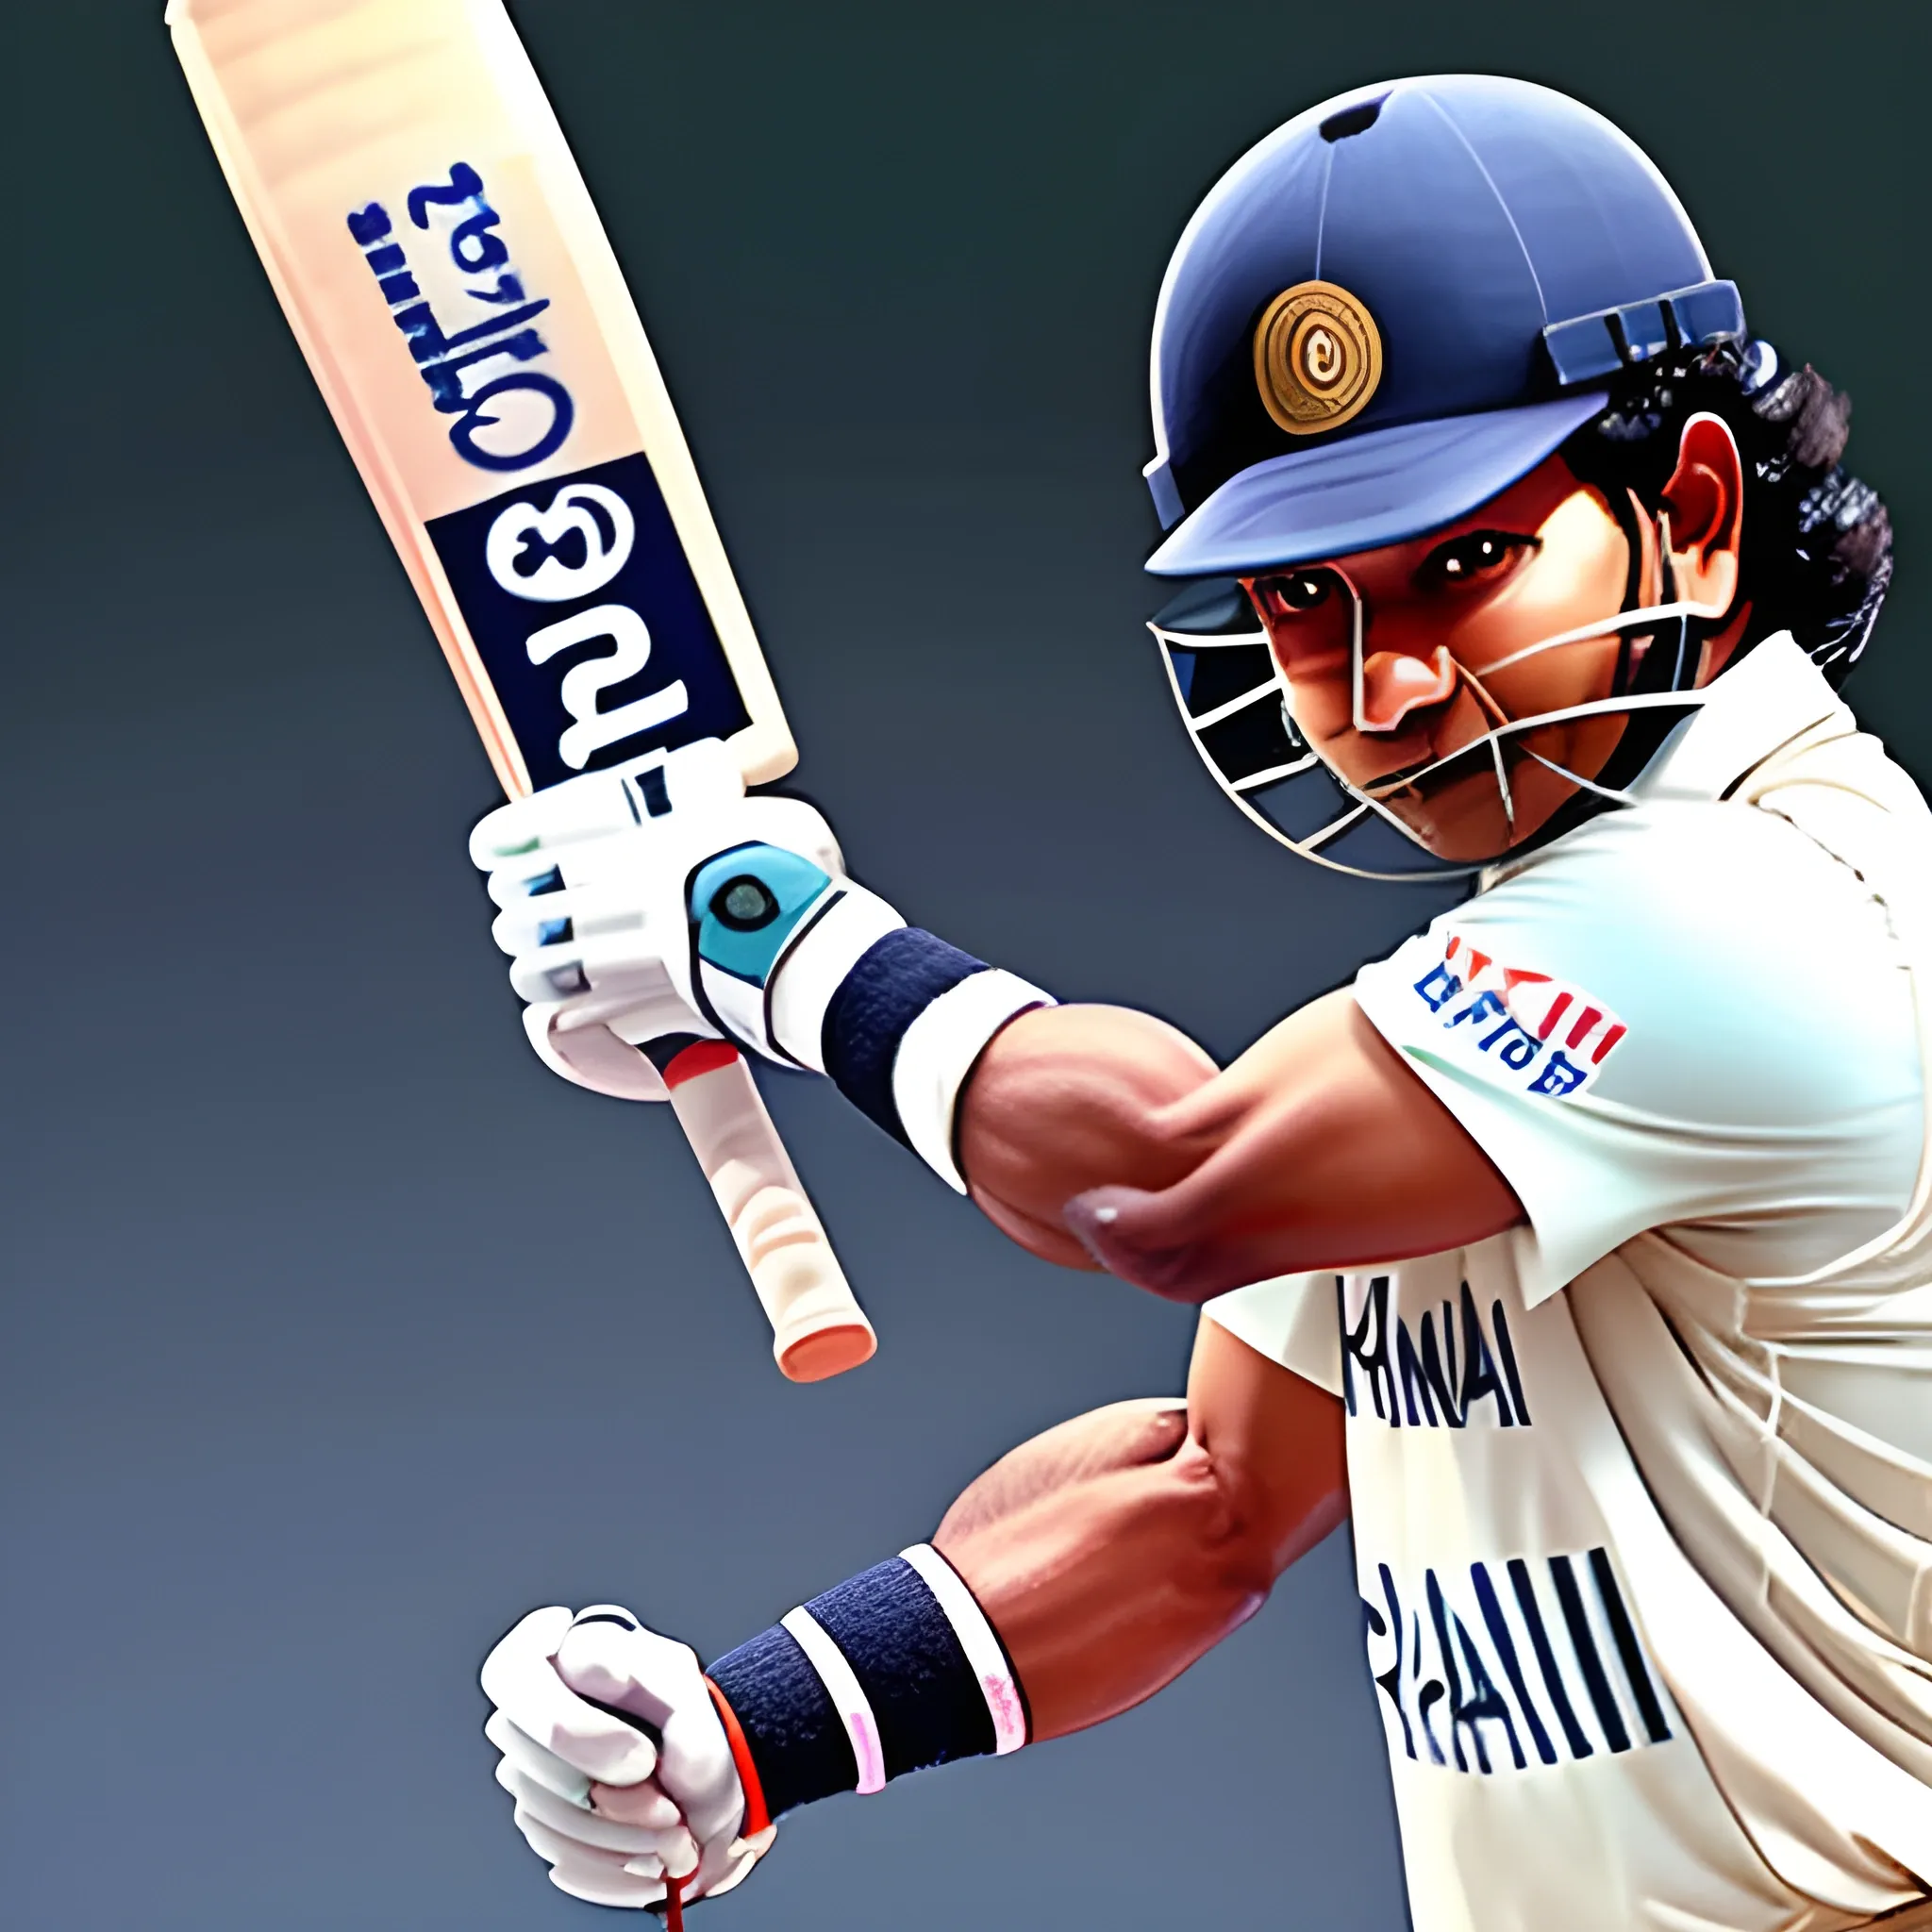 ((Sachin Tendulkar)) fighting with ((Rahul Dravid)) with bat in hand, ultra HD, hyper realistic, great face details